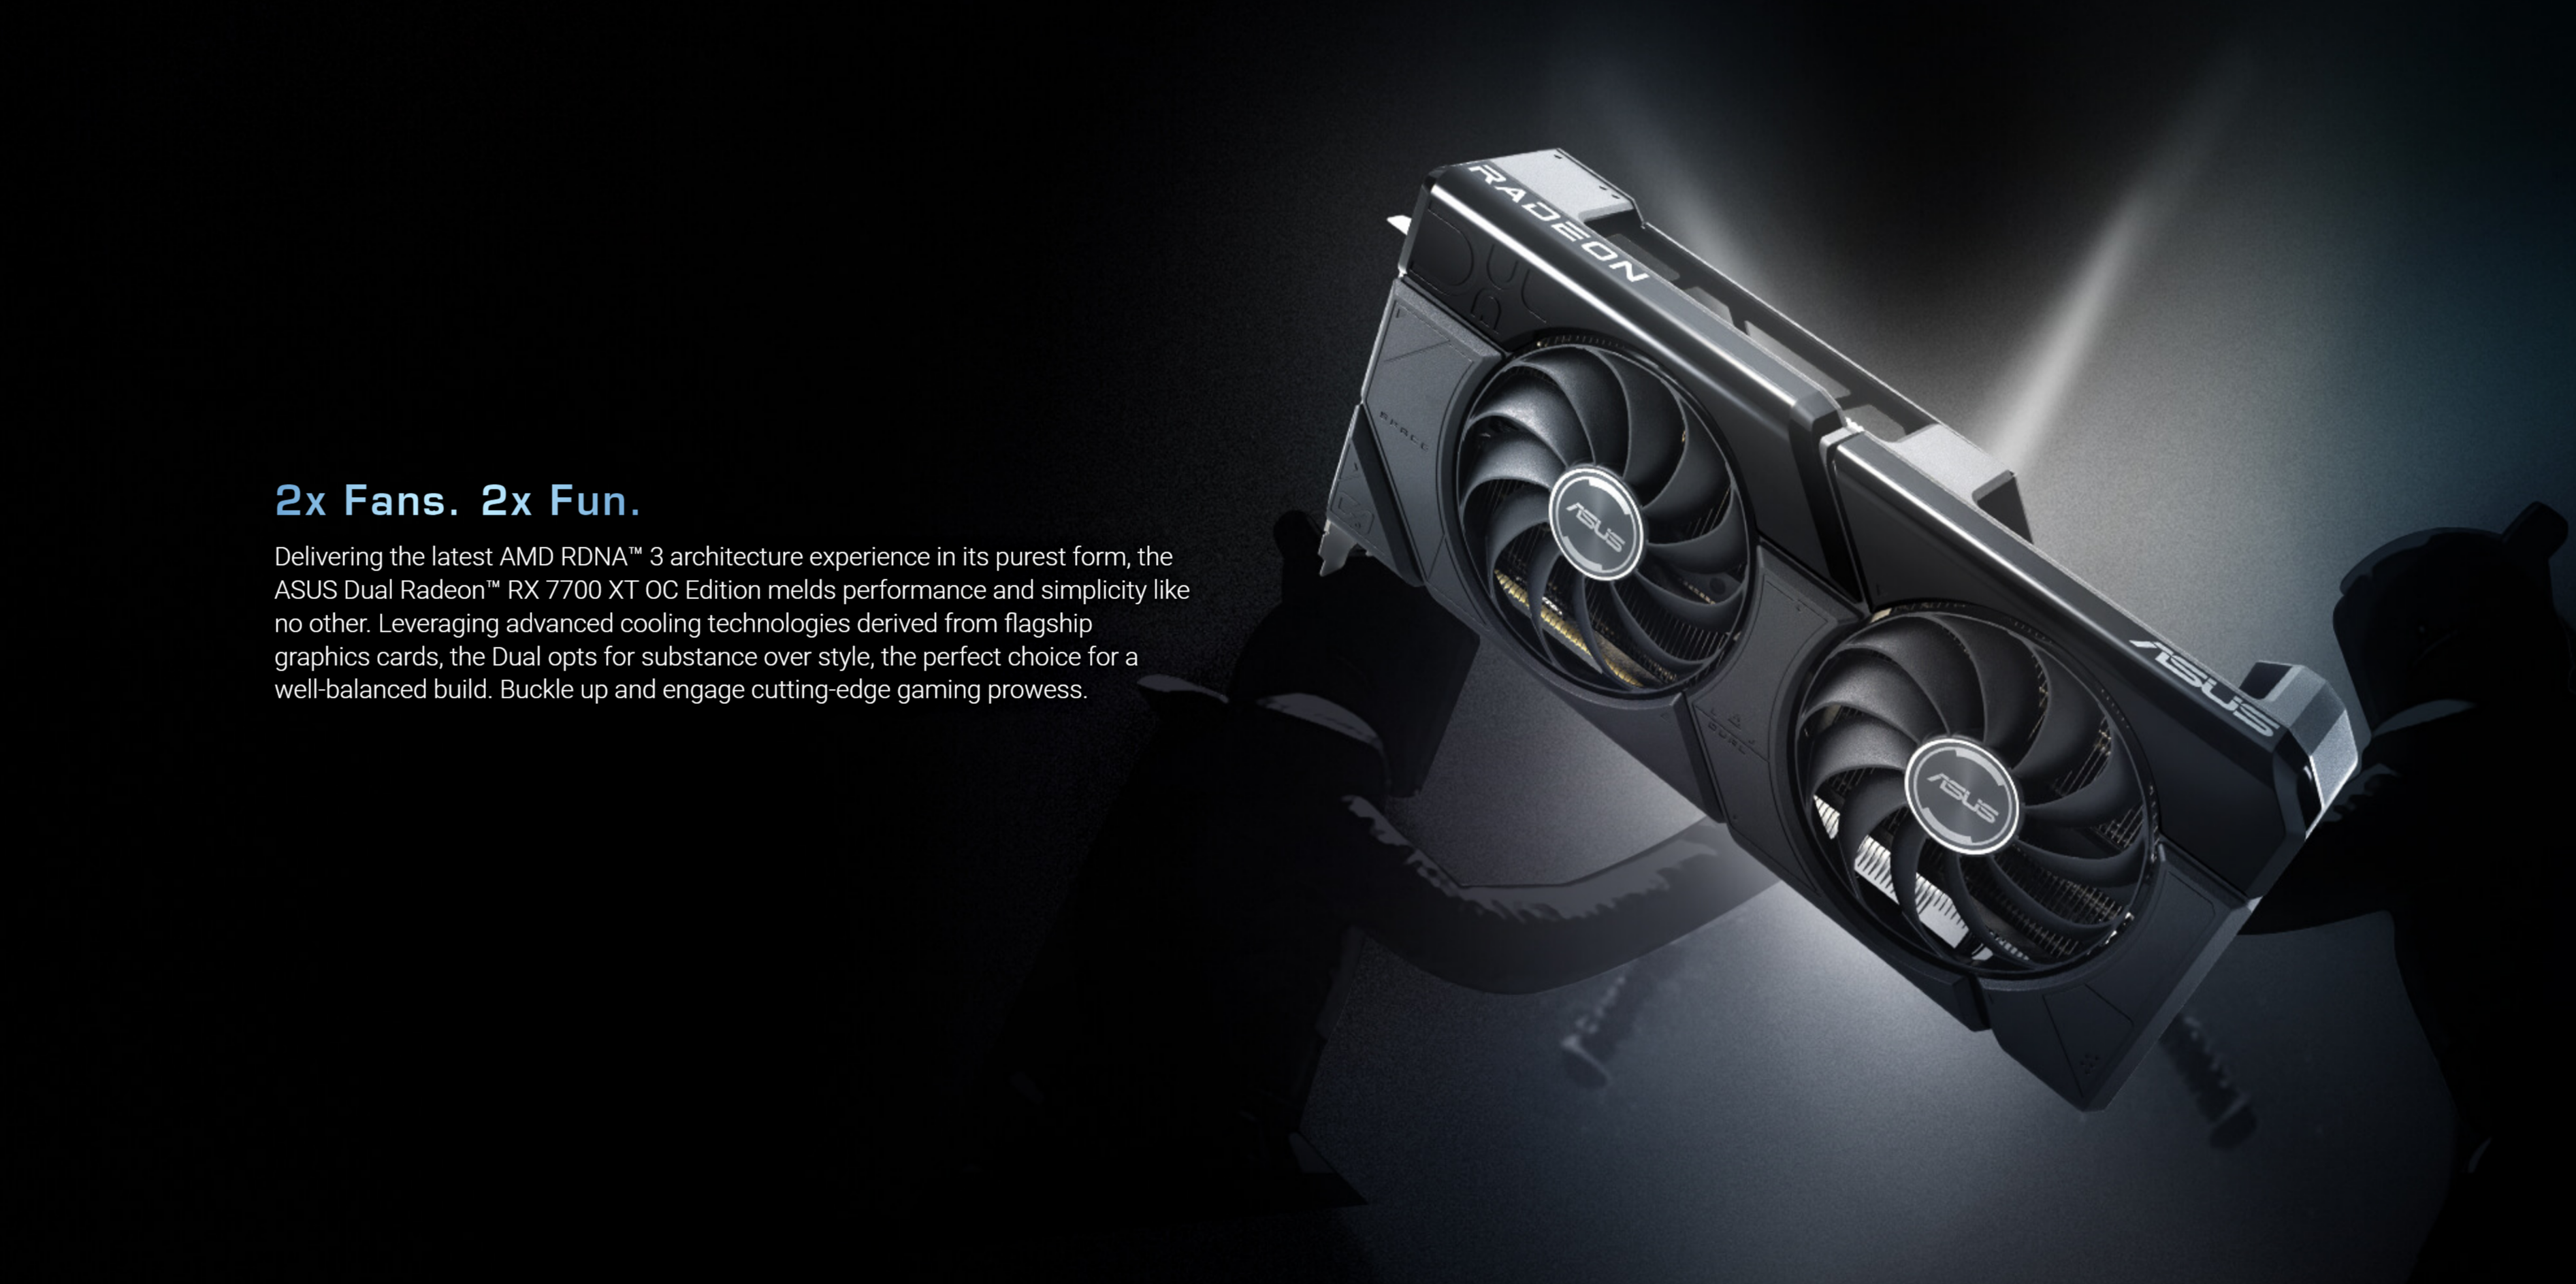 A large marketing image providing additional information about the product ASUS Radeon RX 7700 XT Dual OC 12GB GDDR6 - Additional alt info not provided